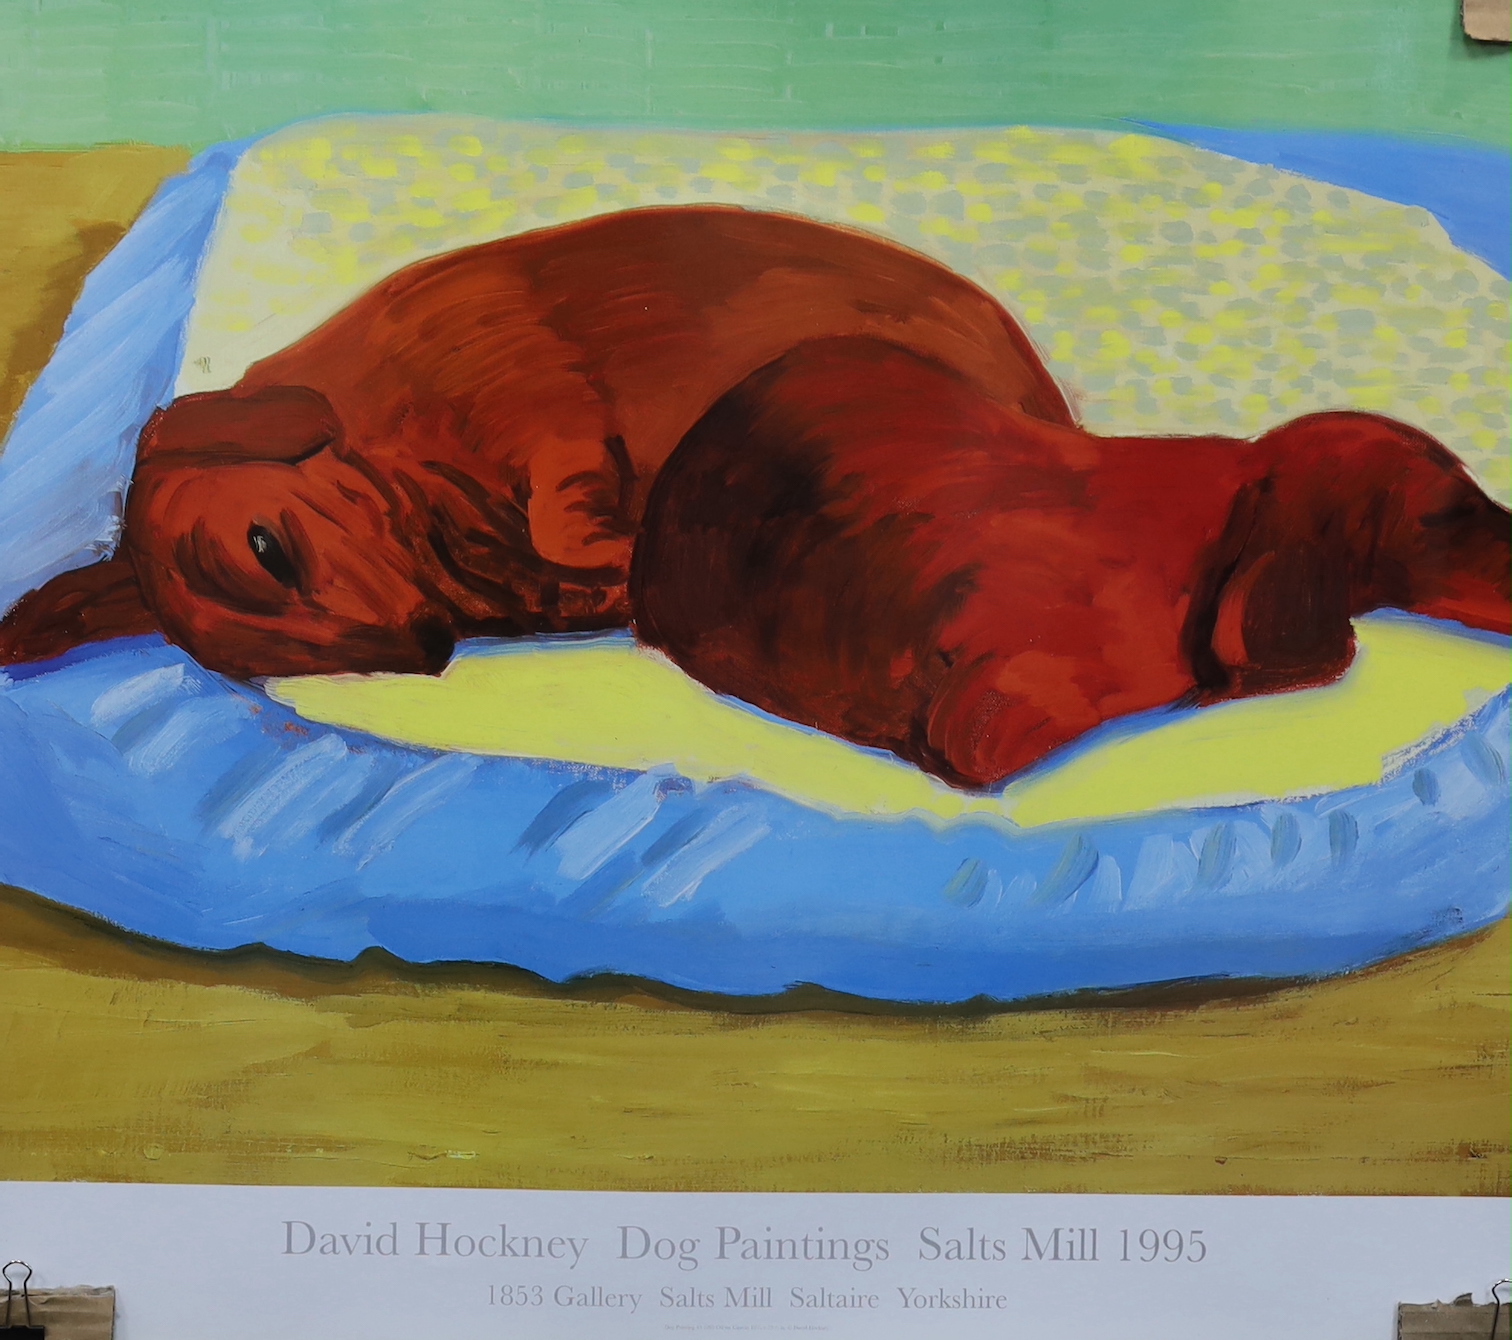 David Hockney RA (British b.1937), offset lithograph exhibition poster, Dog Paintings, Salts Mill, 1995, 53 x 65cm, unframed